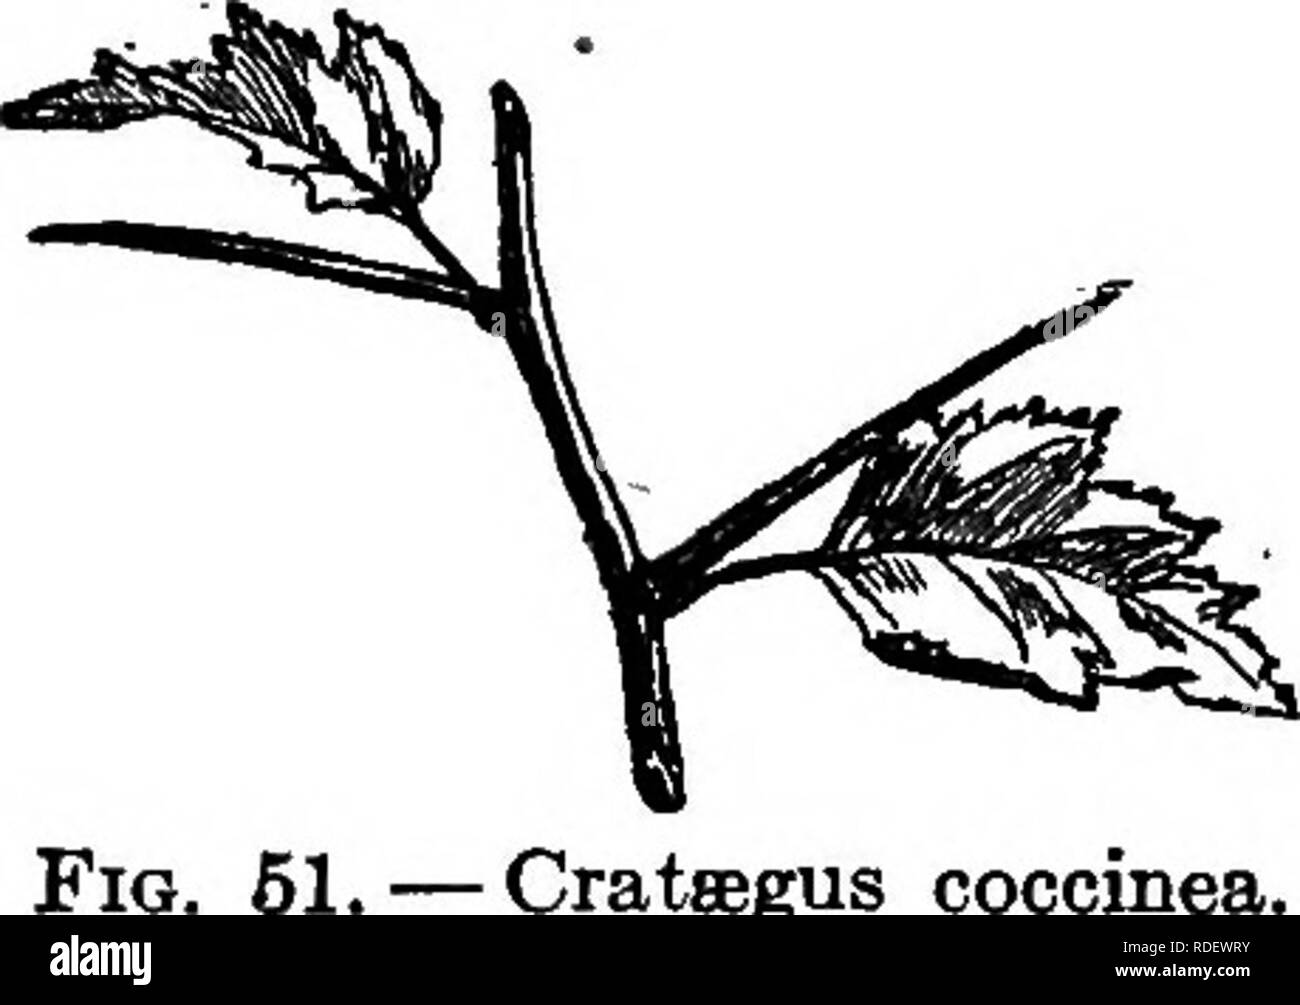 . Selected western flora : Manitoba, Saskatchewan, Alberta . Botany; Botany; Botany. Fig. 49. — Stipules of Rosa acicularis. / ROSACE^aj 2. S. acicularis, Lindl. Stem 1-4 ft. high, very prickly; stipules dilated, glandular-ciliate or resinous; leaflets 3-7, oblong, sessile; flowers mostly solitary. Thickets, Man.-AIta., not well defined. 3. R. pratincola, Greene. Stems low, very prickly; stipules narrow, more or less glandular-toothed; leaflets 7-11, elliptical to oblanceolate, prominently veined; flowers pink turning white, usually in corymbs. (B. arkansdna. Porter.) Prairies, Man.-Alta. 67 F Stock Photo